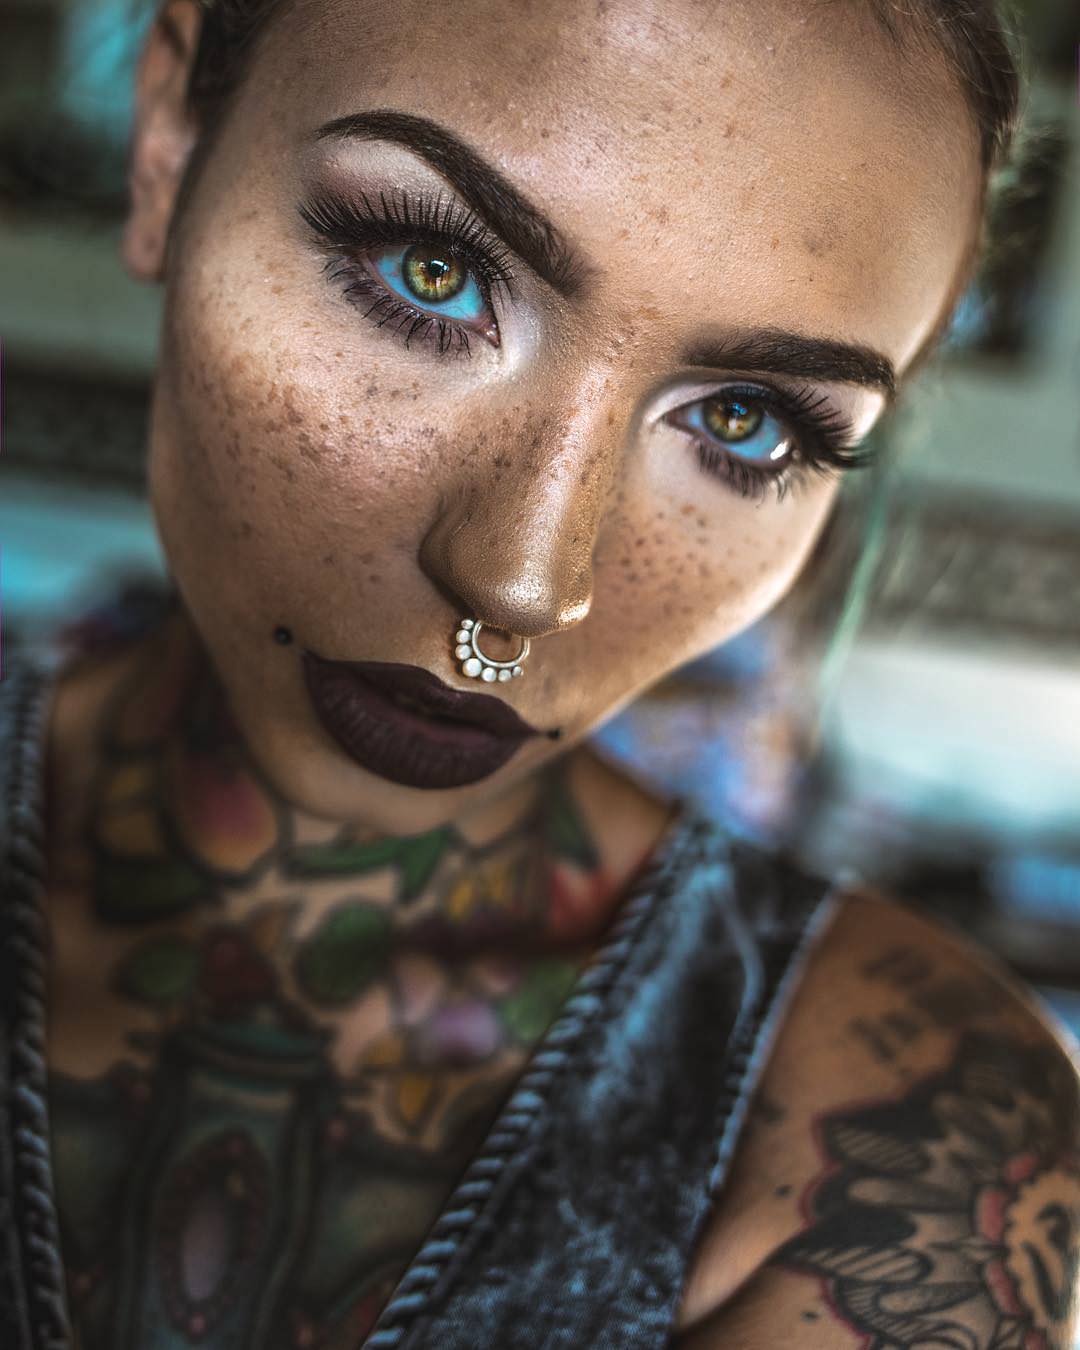 cool picture of girl who has tattoos on her eyes and body